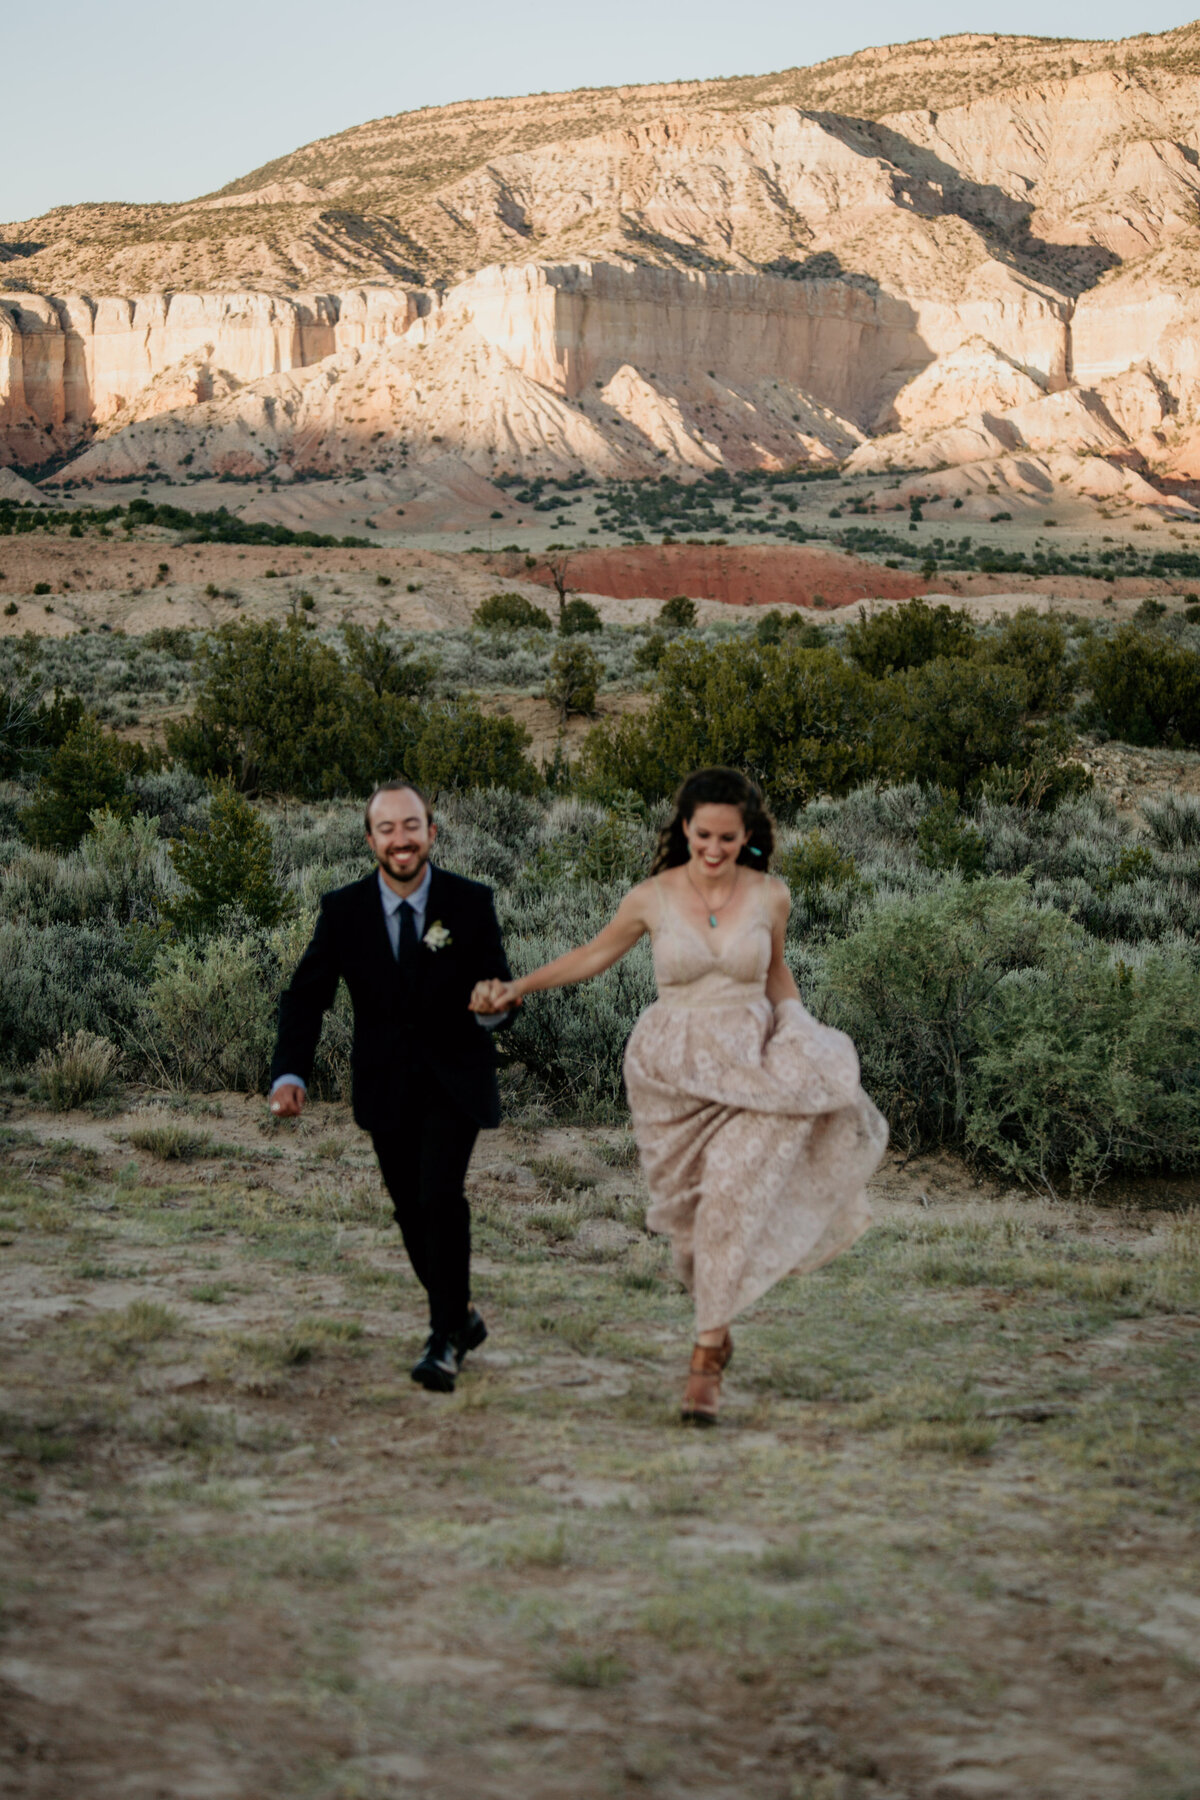 eloping couple running through the desert together